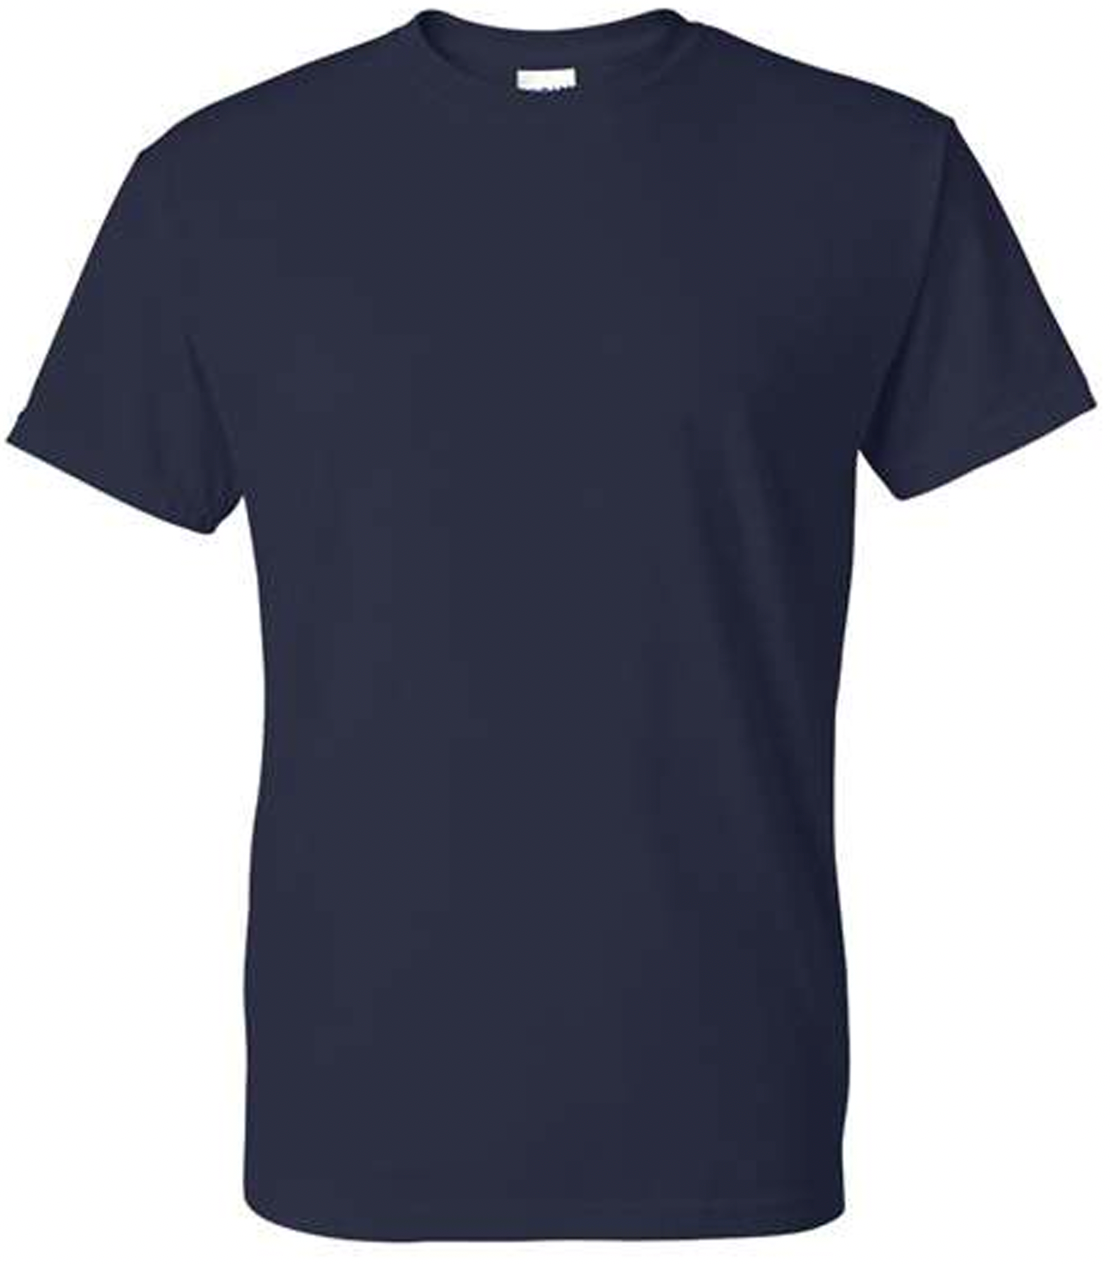 Left Chest Logo - Integrated Services Housing T-Shirts